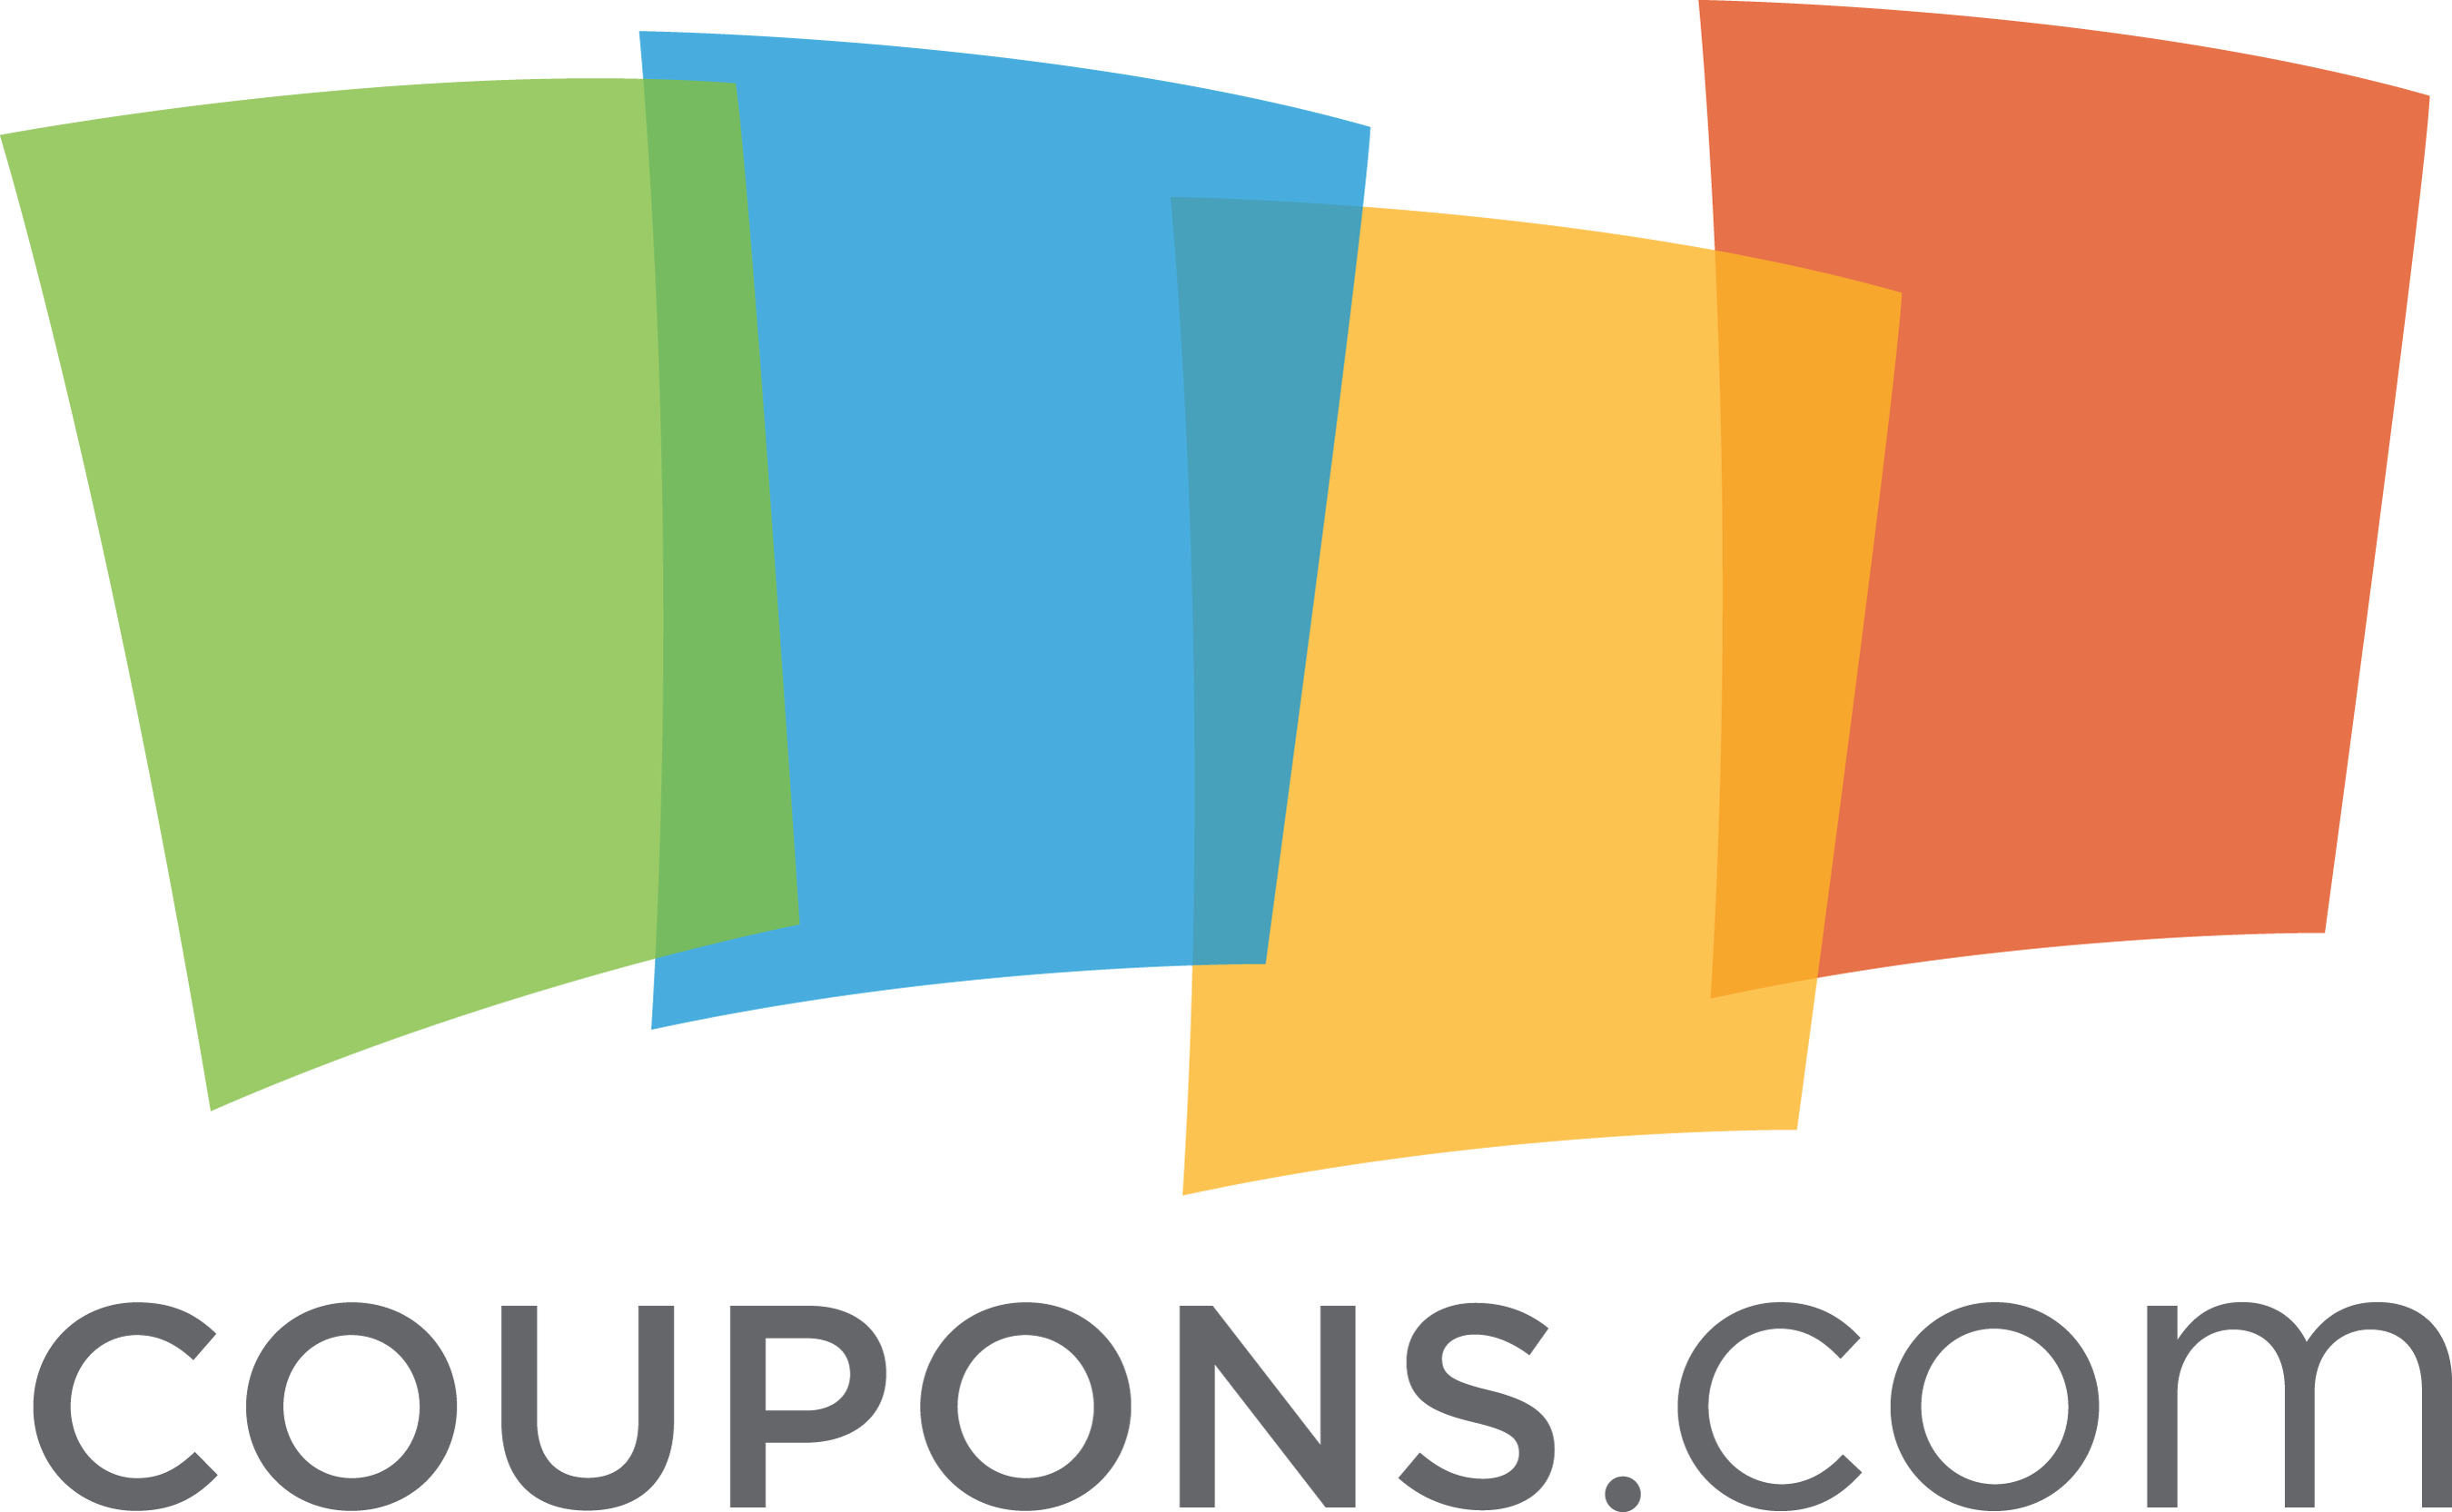 Coupons.com Incorporated operates a leading digital promotion platform that connects great brands and retailers with consumers.